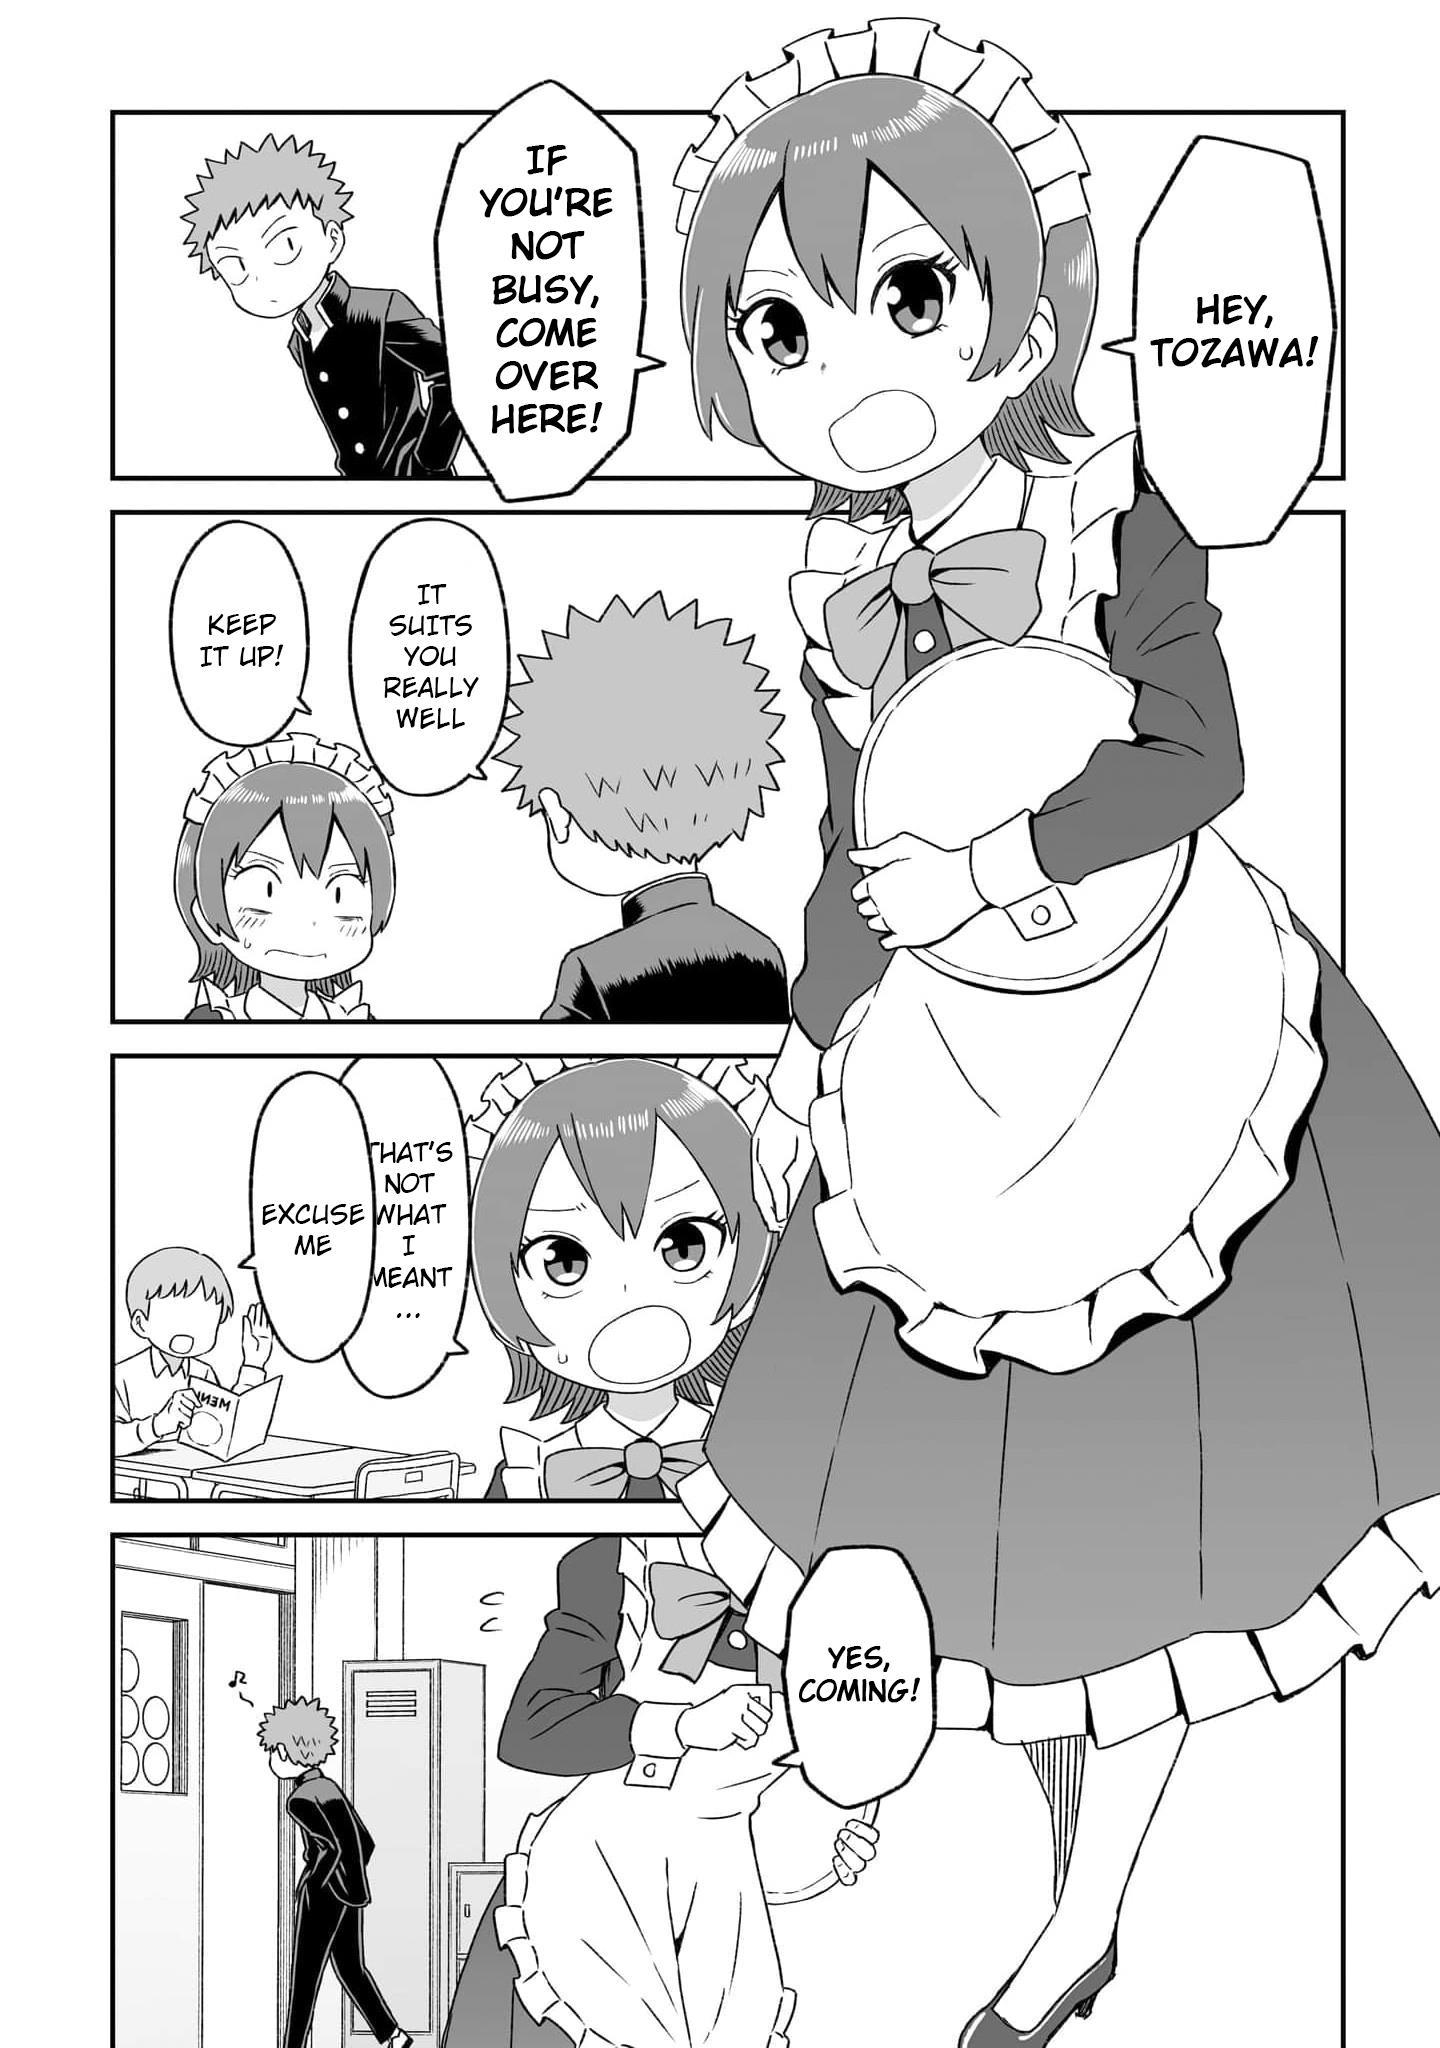 I'm The Only One Not Crossdressing!? - Page 2